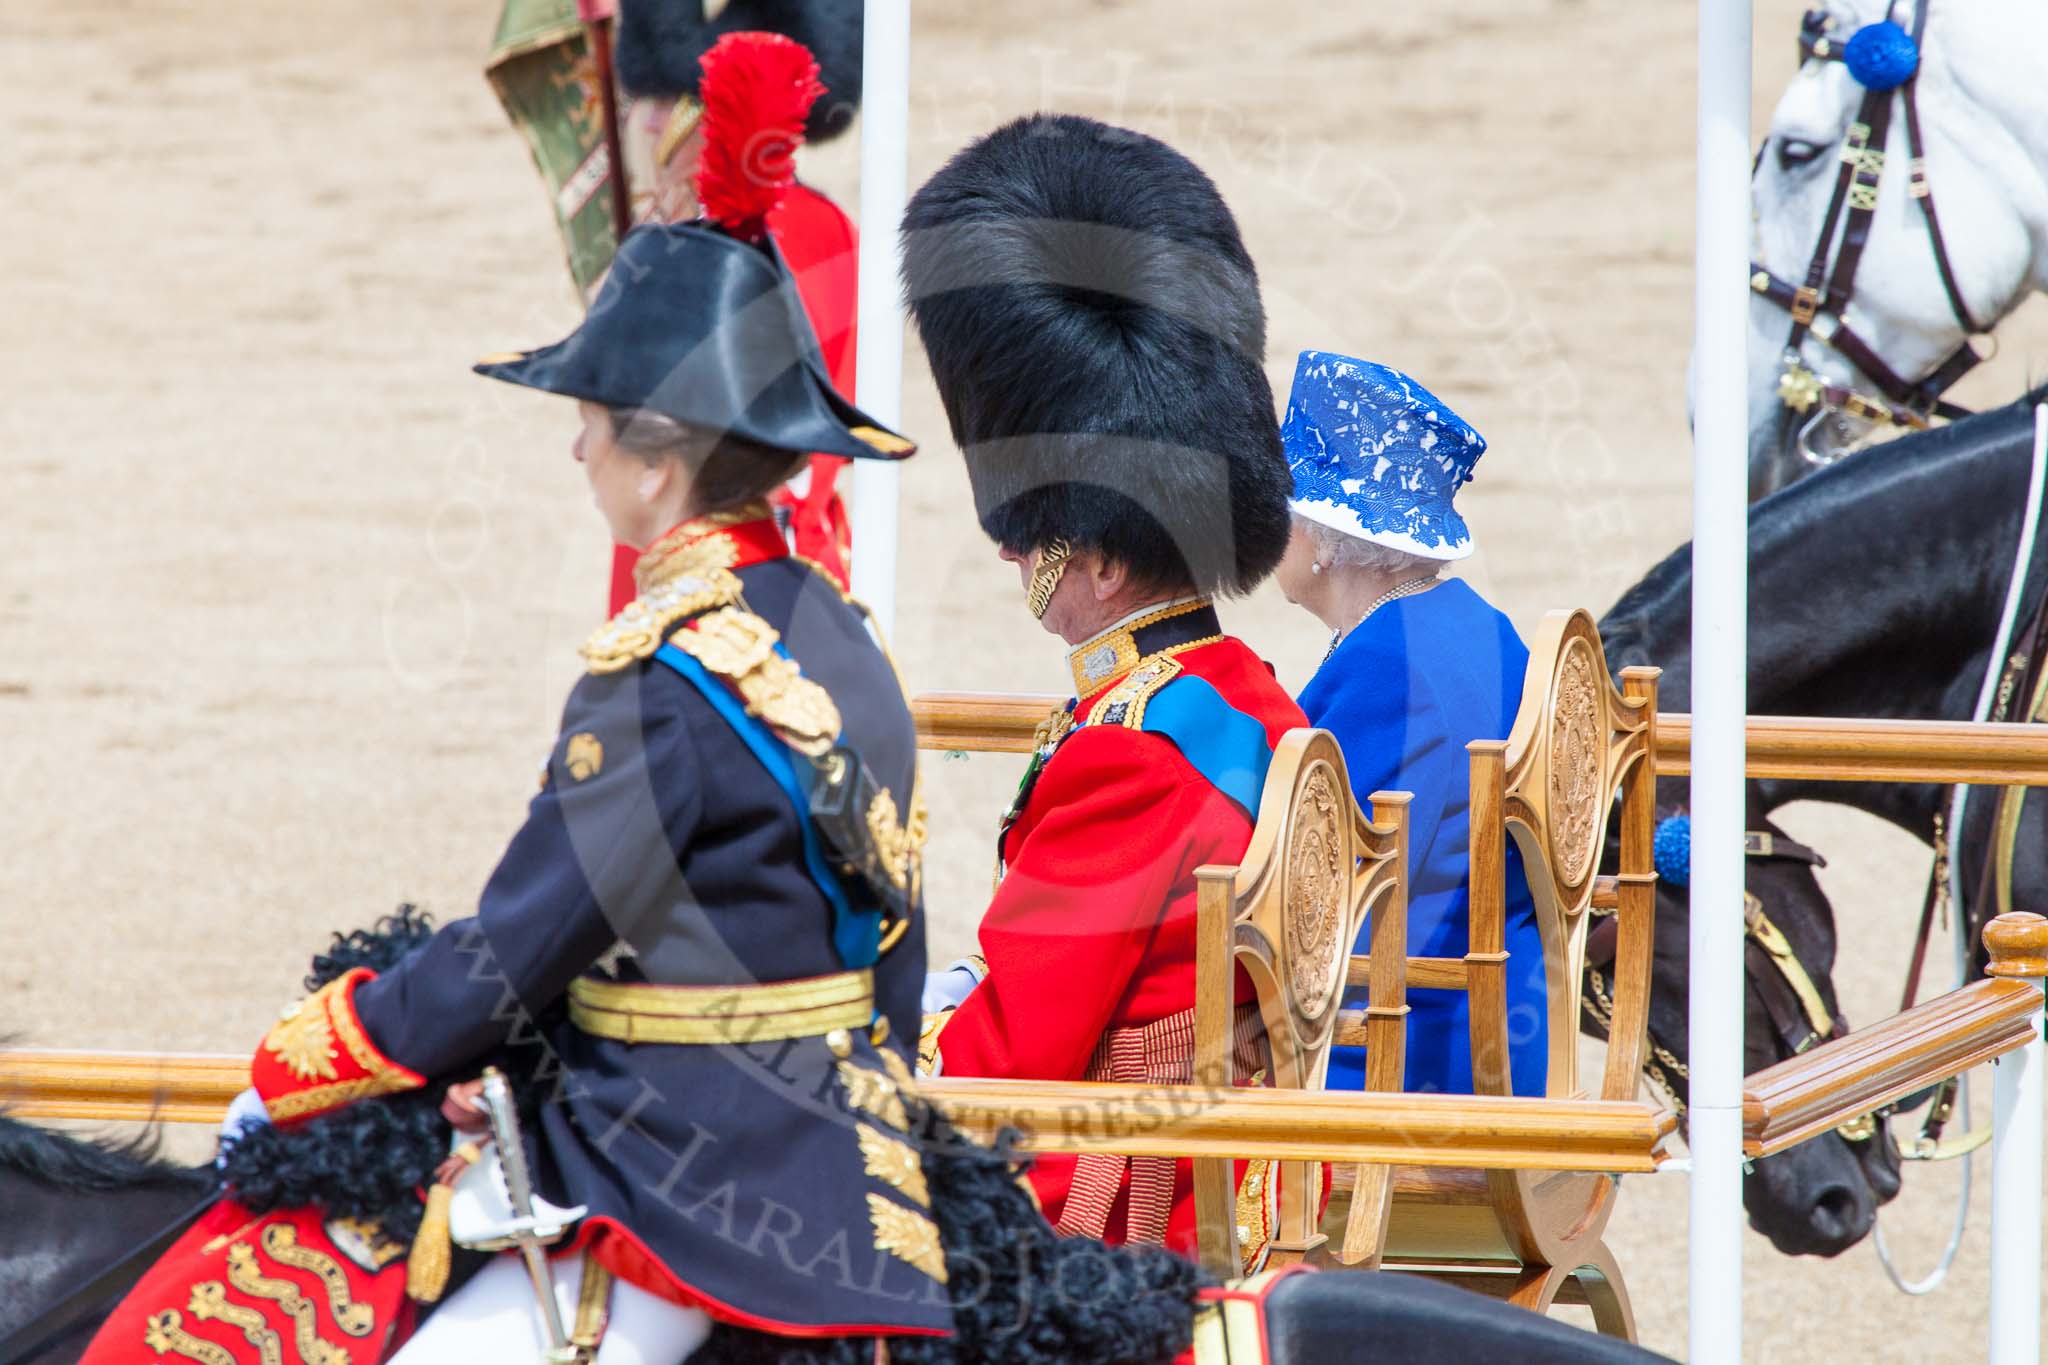 Trooping the Colour 2013: HM The Queen and HRH The Duke of Kent on the dais watching the massed bands troop. Image #410, 15 June 2013 11:12 Horse Guards Parade, London, UK